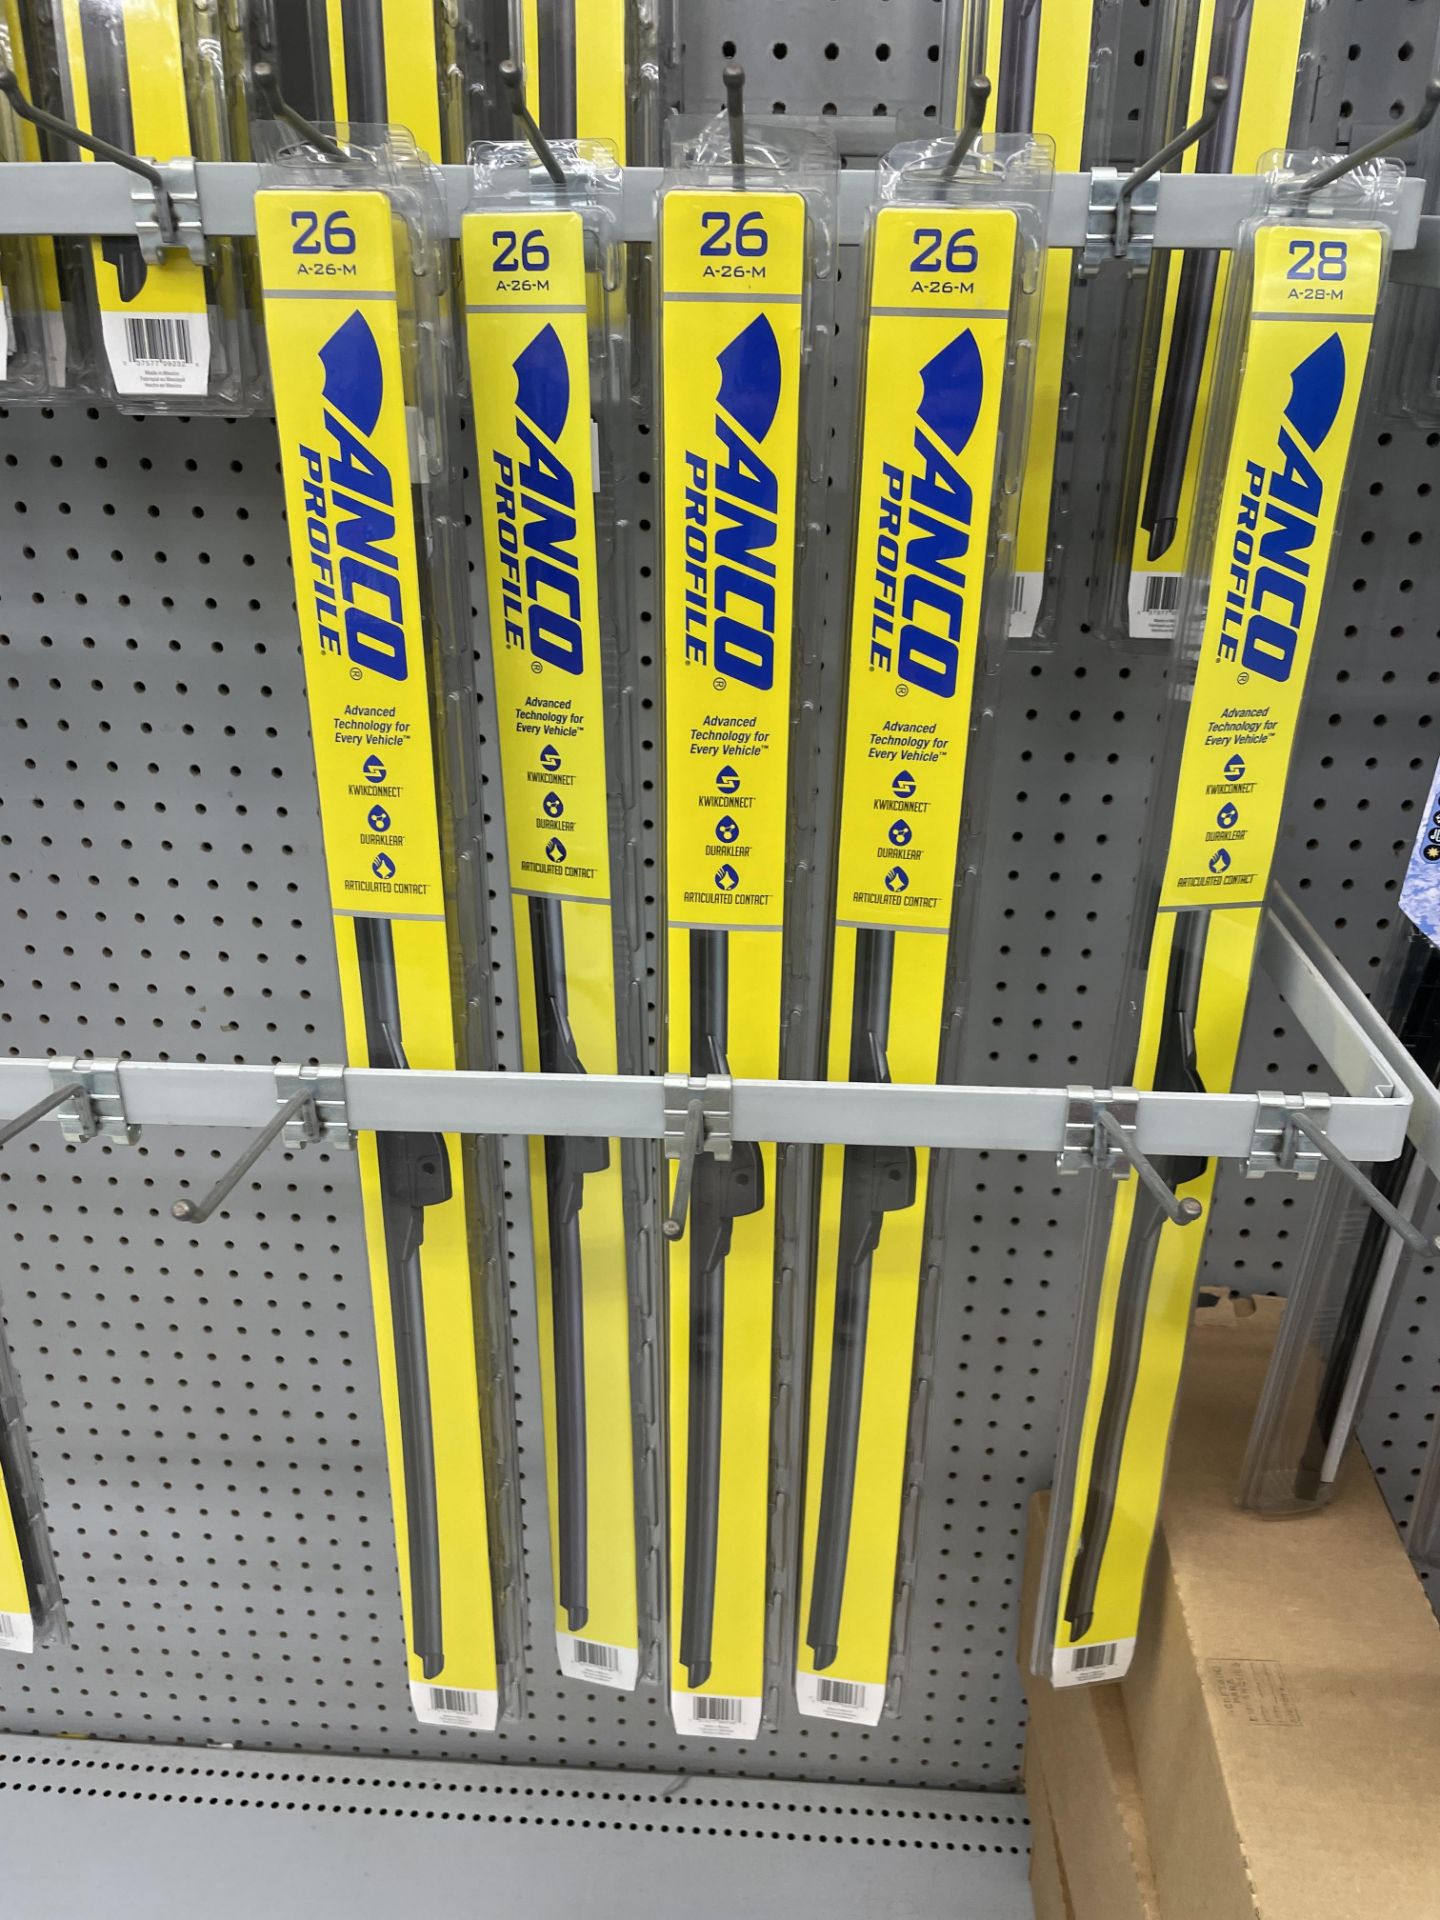 (Lot) Anco Wiper Blades Traditional and All Weather (254) Pieces w/Wholesale Value of $1,260 - Image 3 of 6